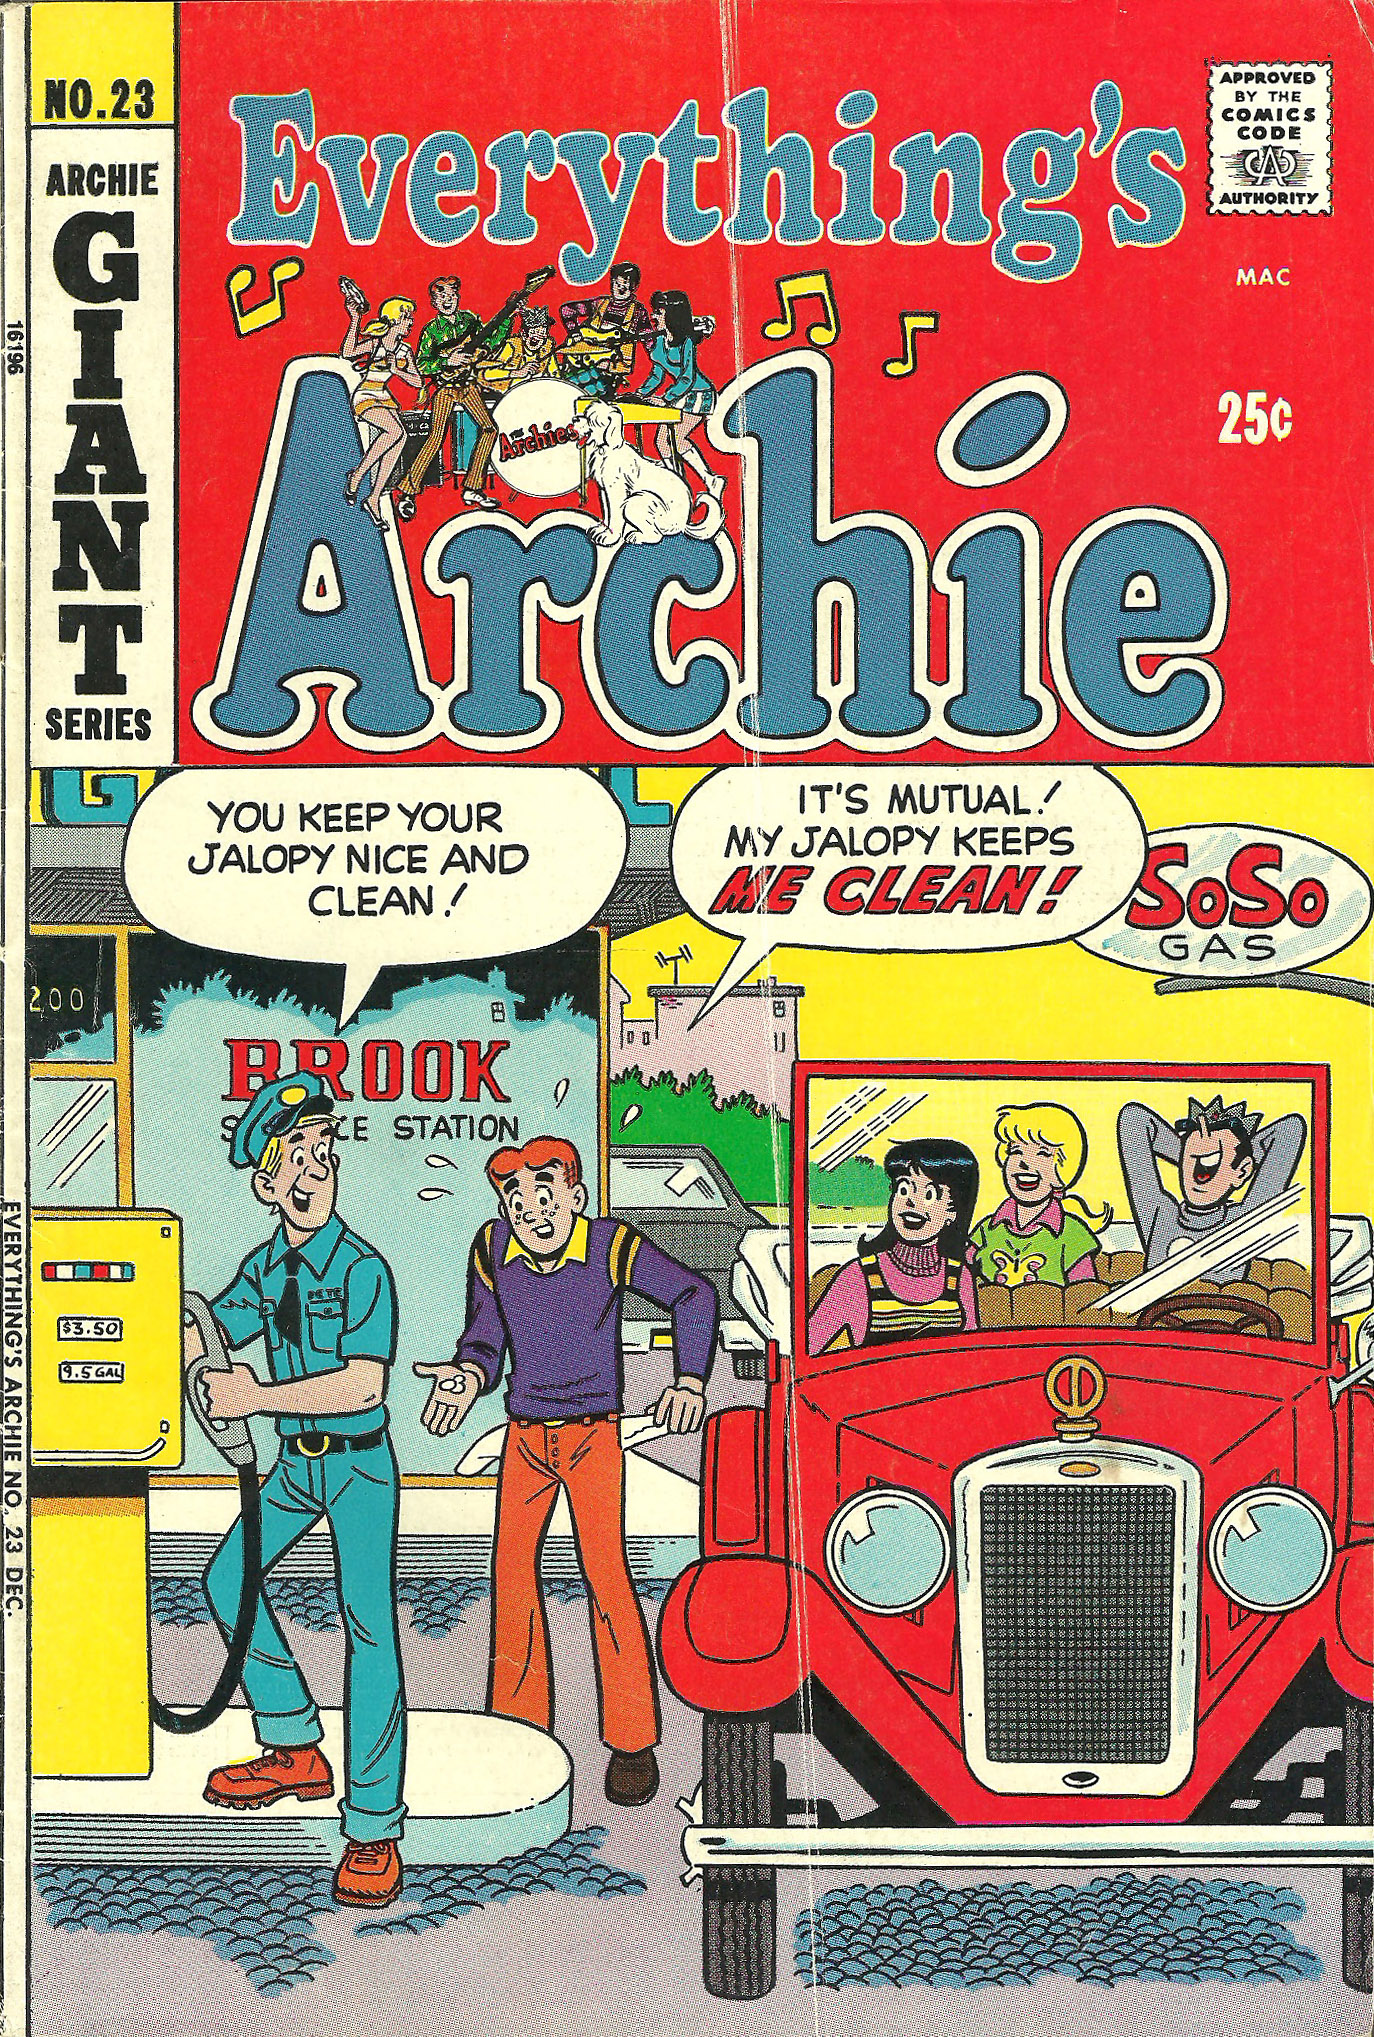 Read online Everything's Archie comic -  Issue #23 - 1